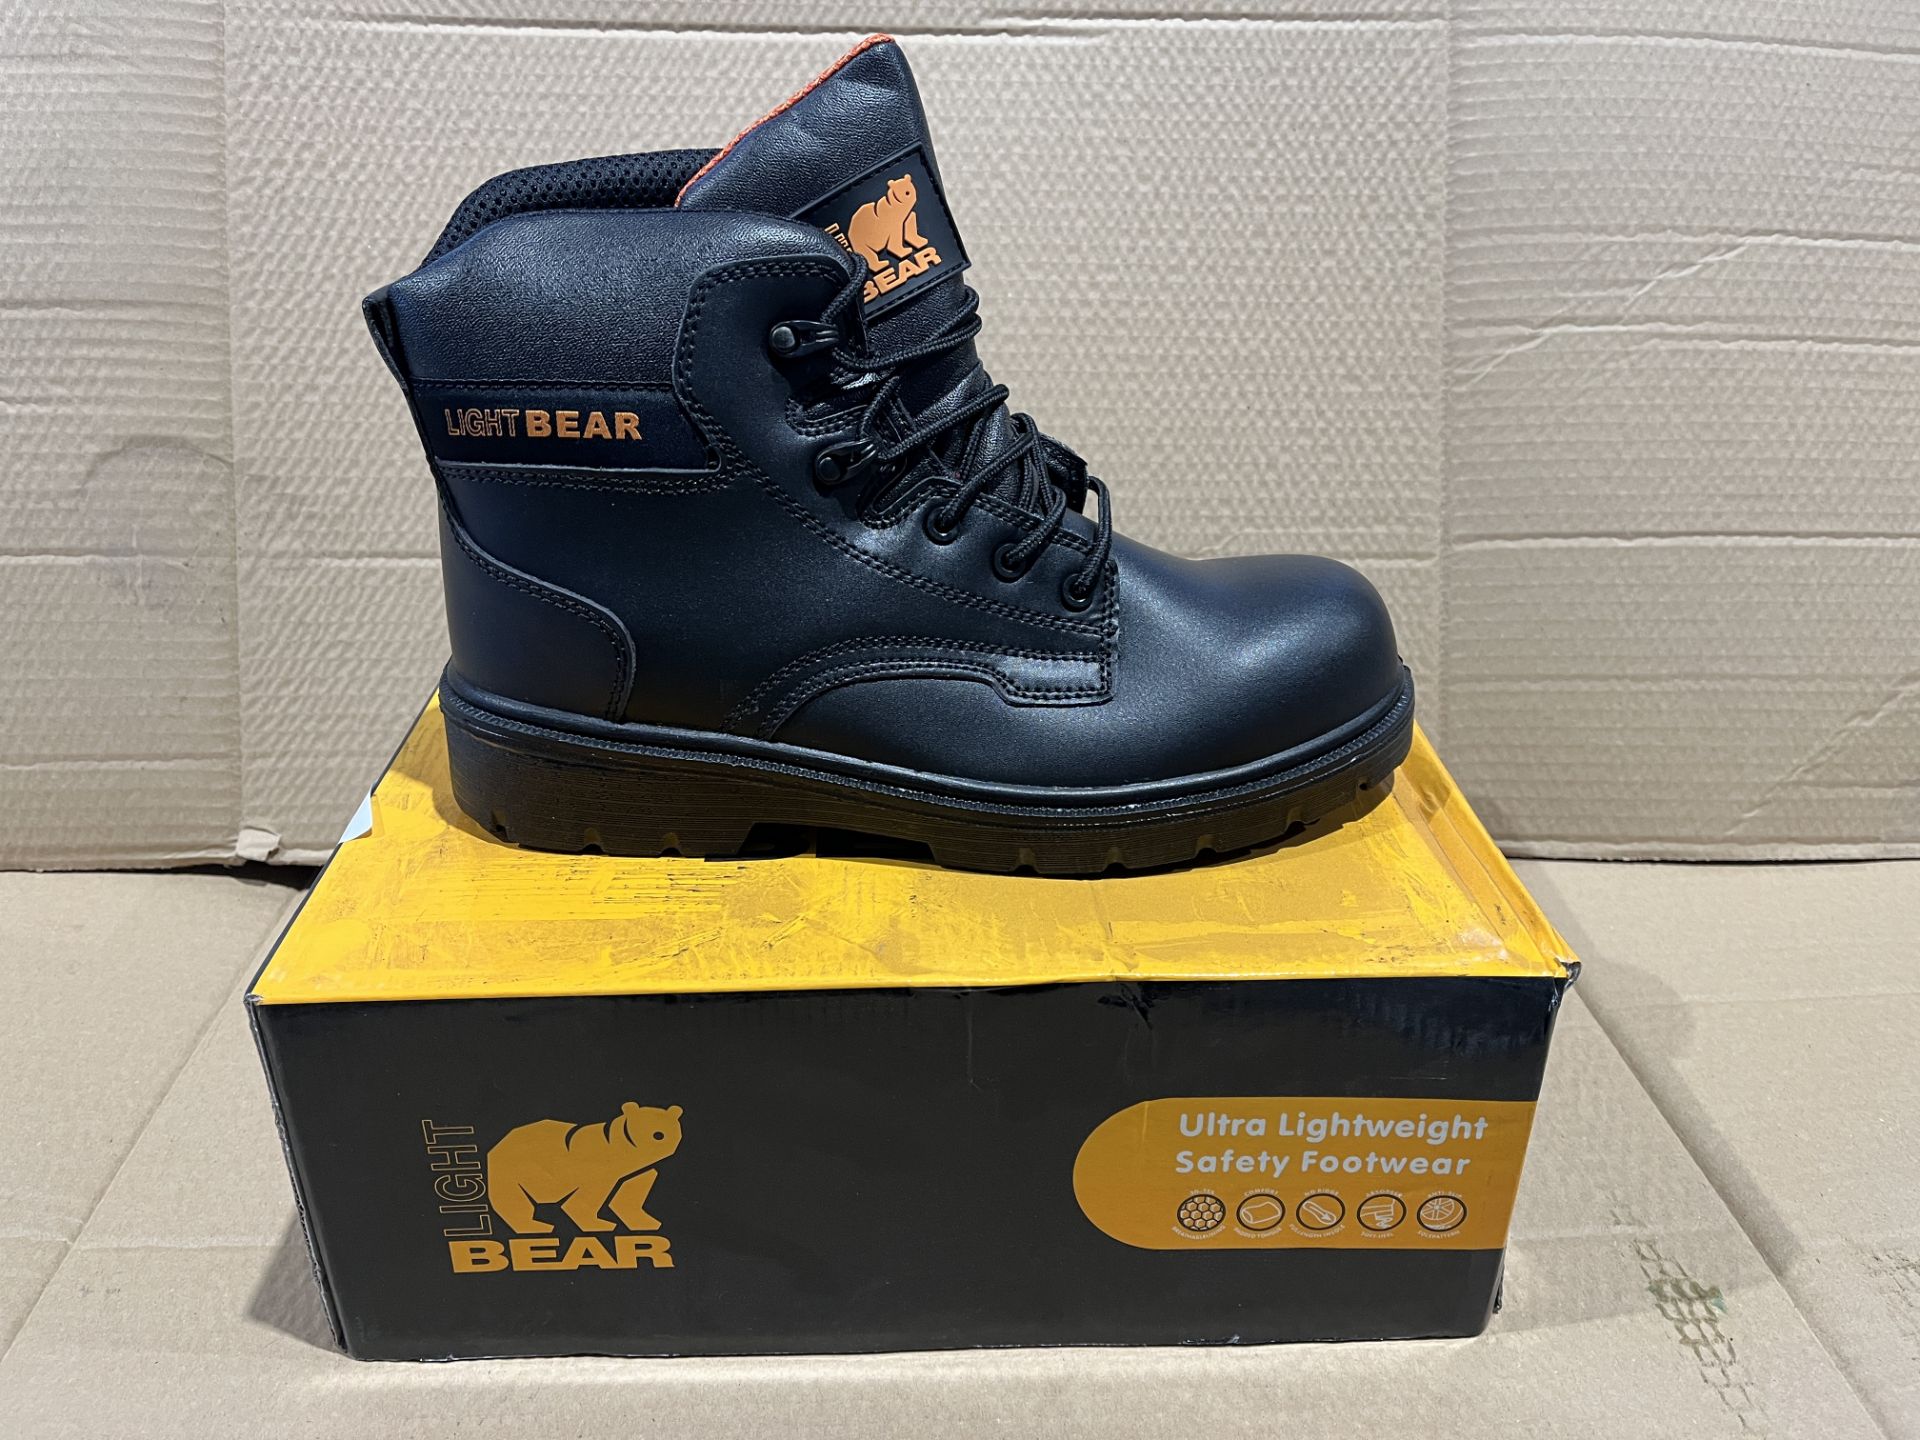 12 X BRAND NEW PAIRS OF BEAR WORK WEAR WORK BOOTS SIZE 9 S1-15